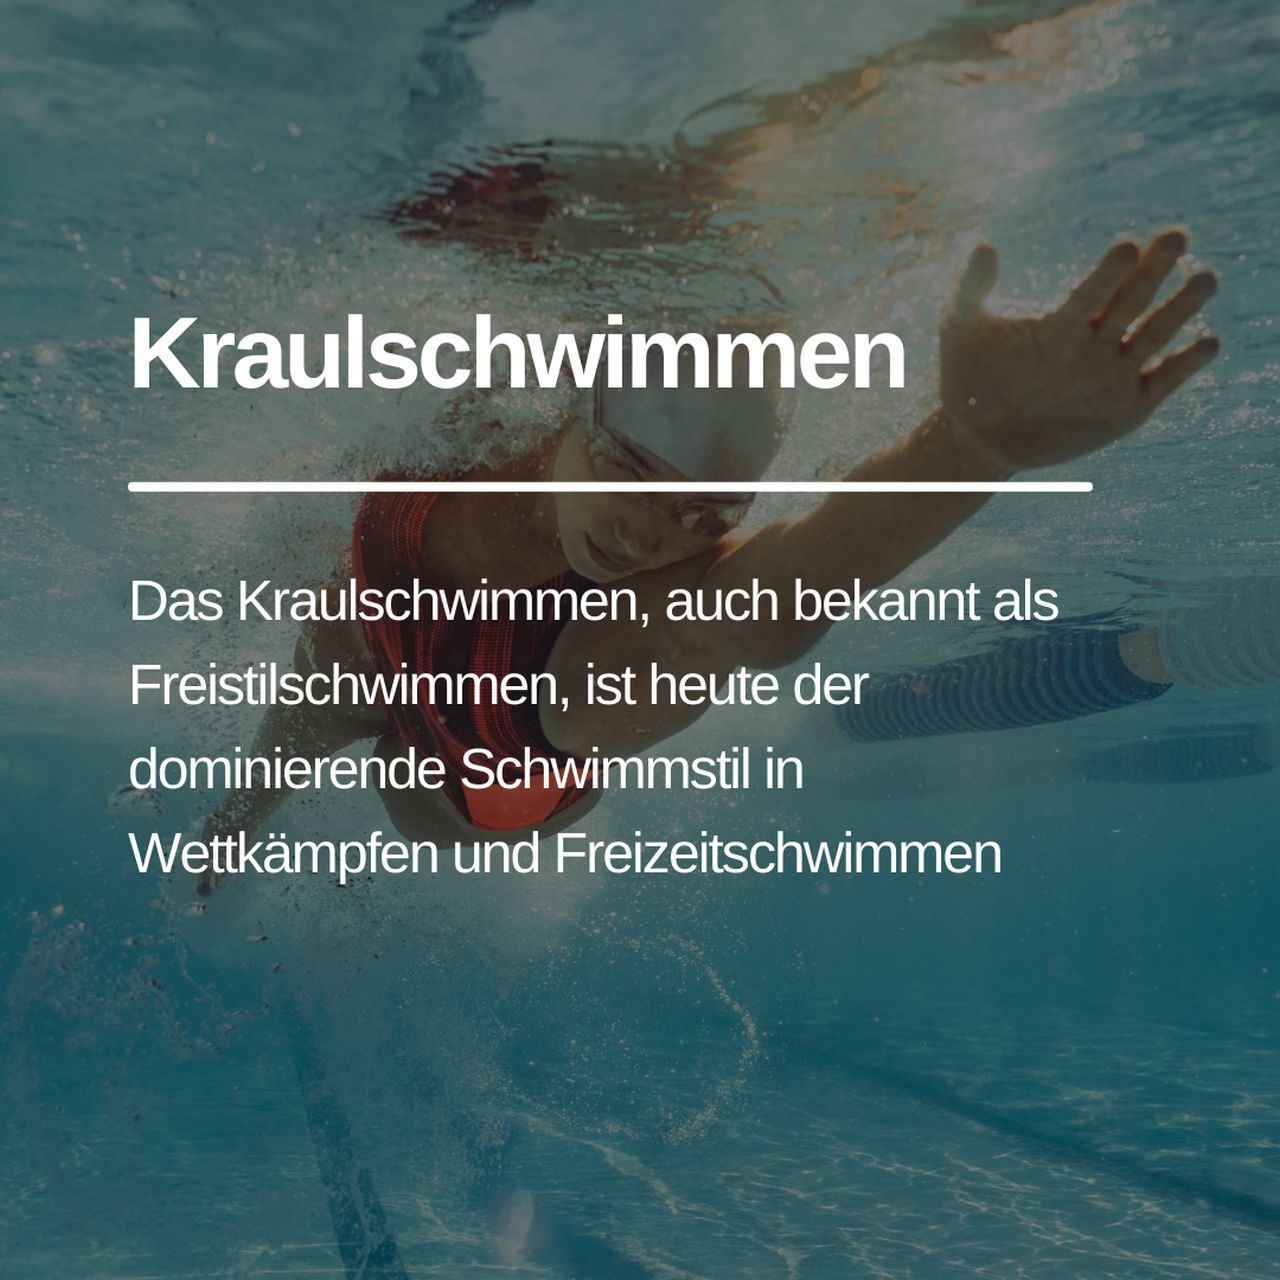 You are currently viewing Die Faszination des Kraulschwimmens